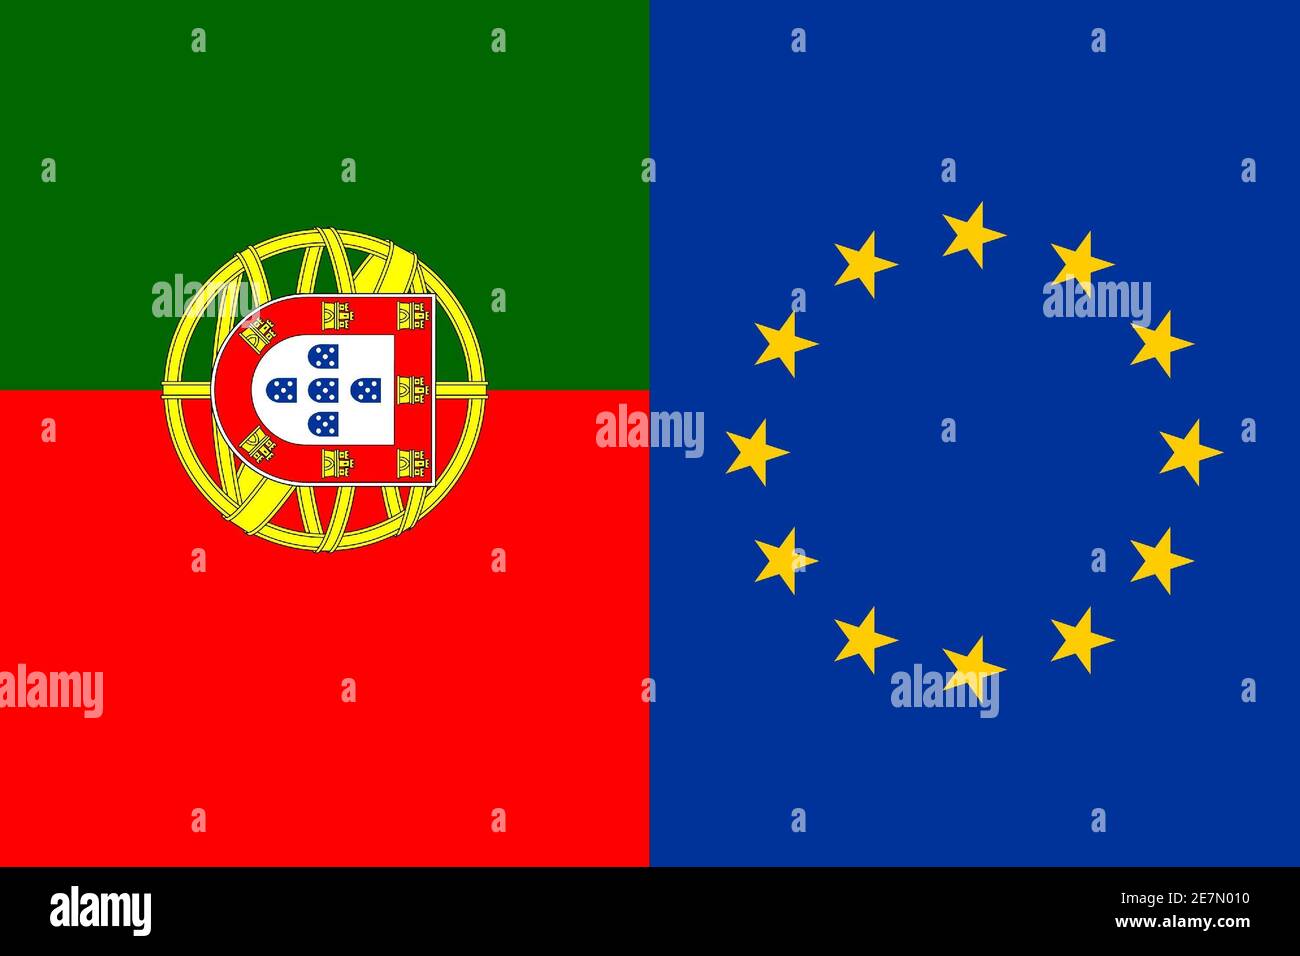 Illustration of the Flag of Portugal and the EU next to each other Stock Photo